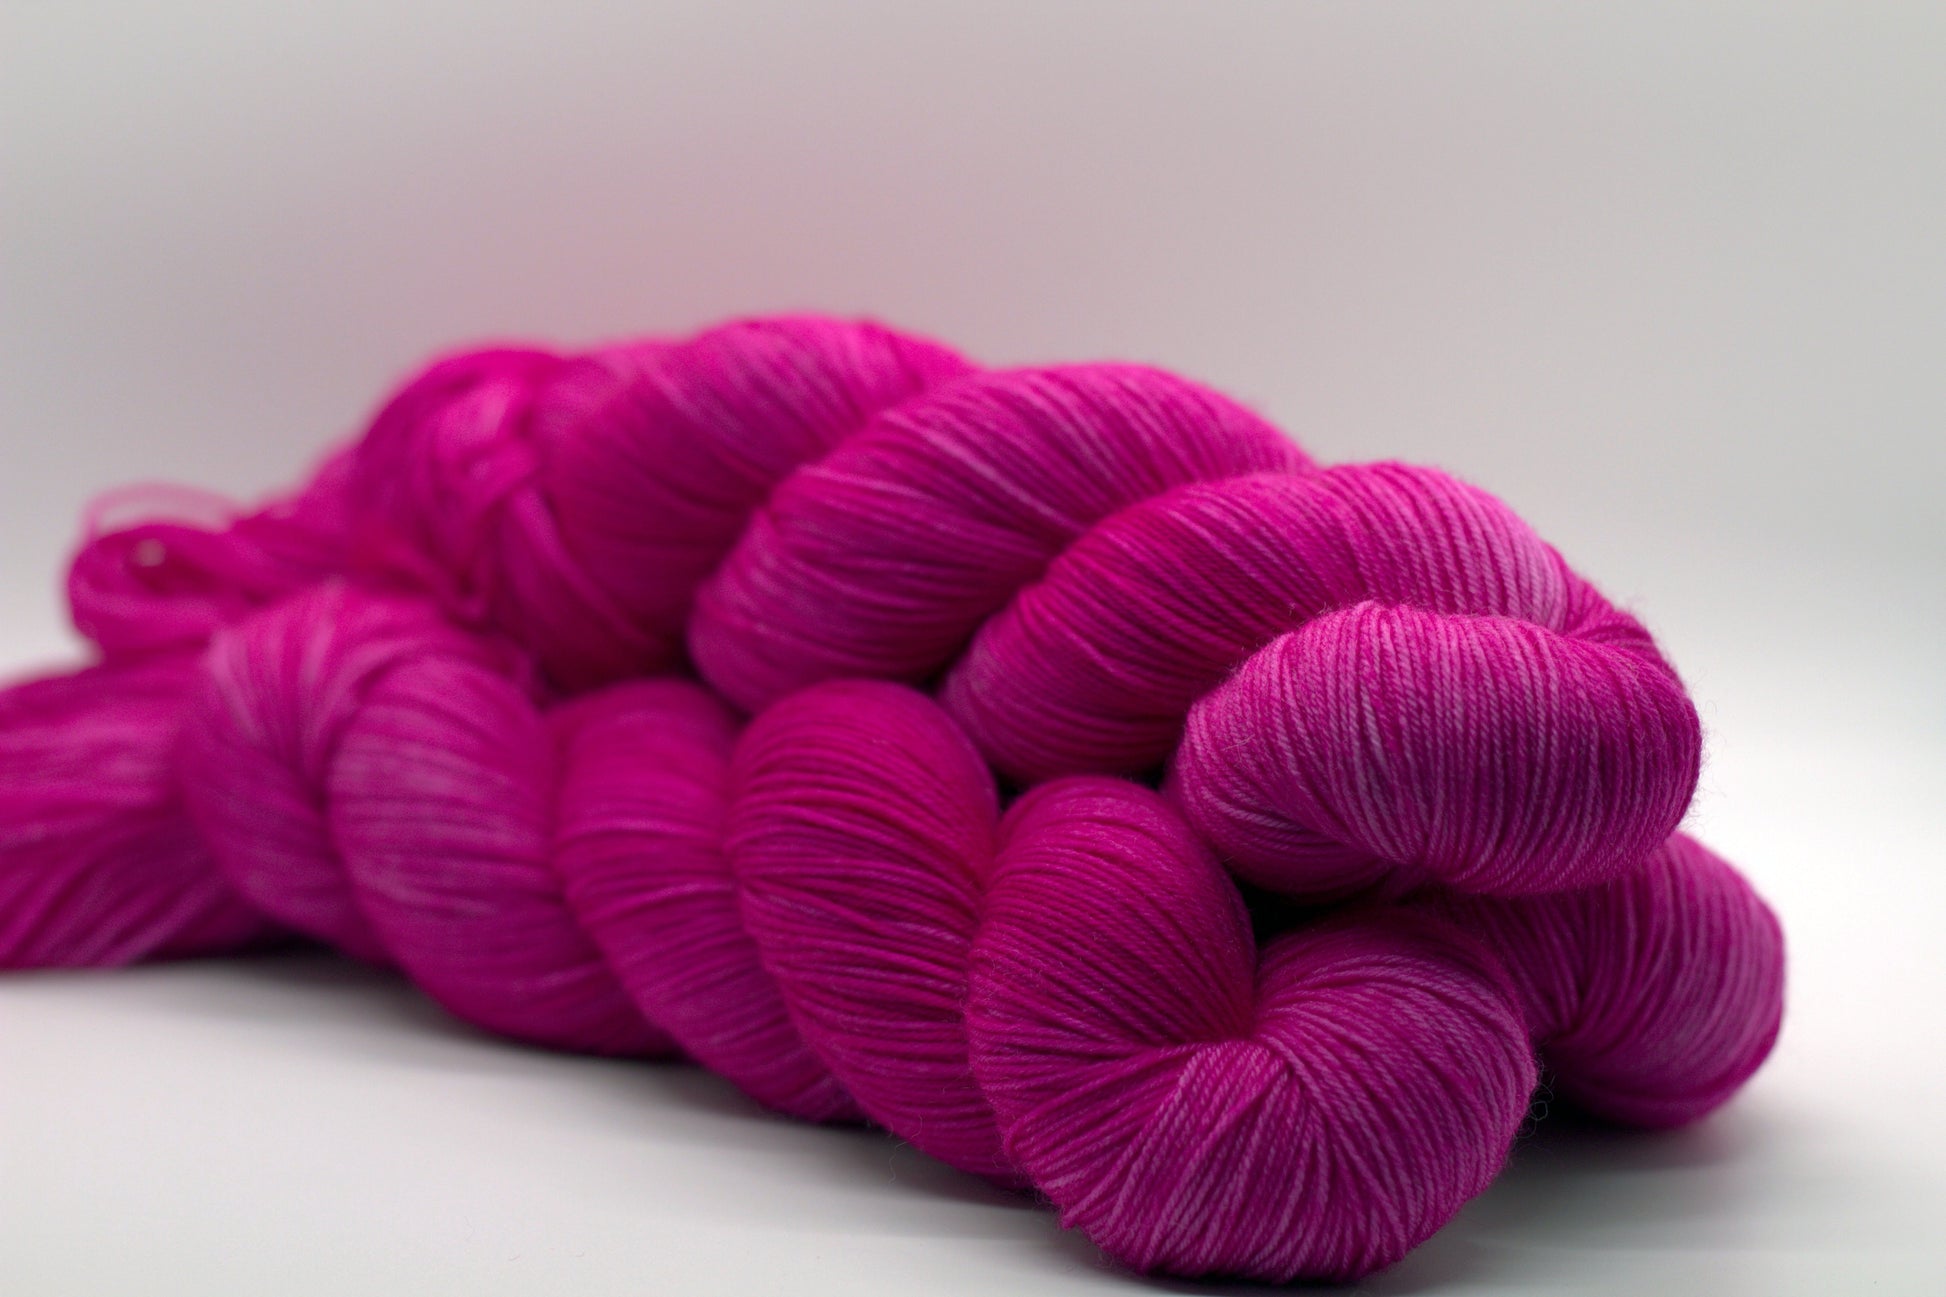 side view of three twisted skeins tonal bright pink yarn on white background.